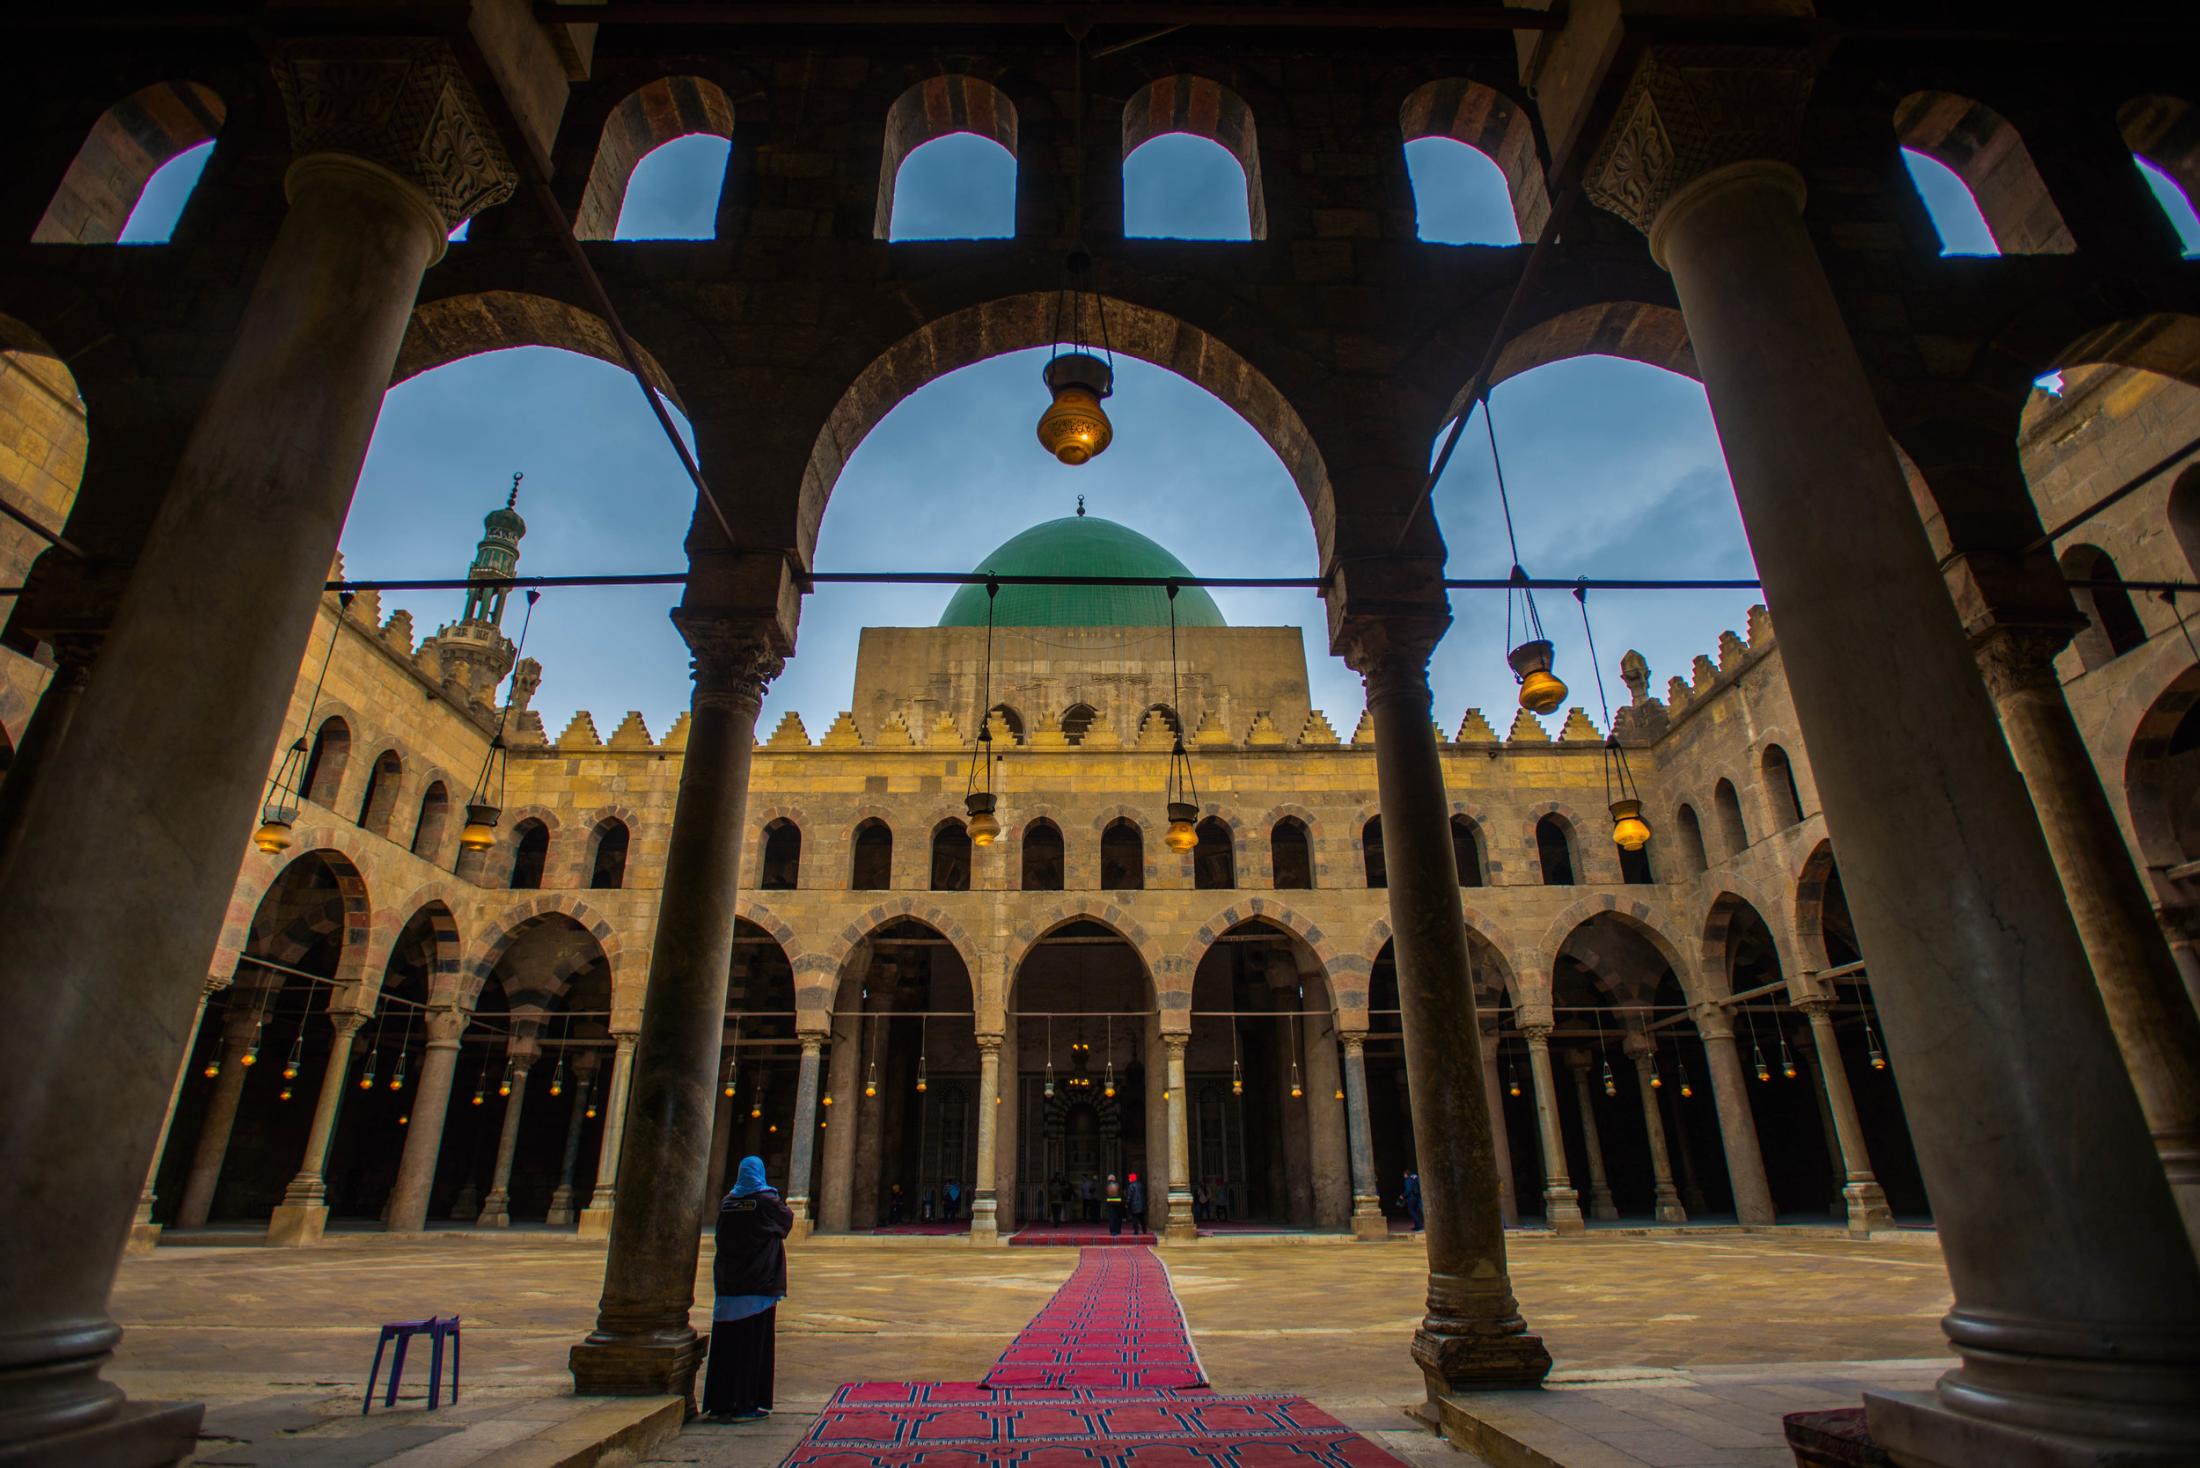 Travel - Cairo, Egypt  The Great Mosque of Muhammad Ali Pasha or...